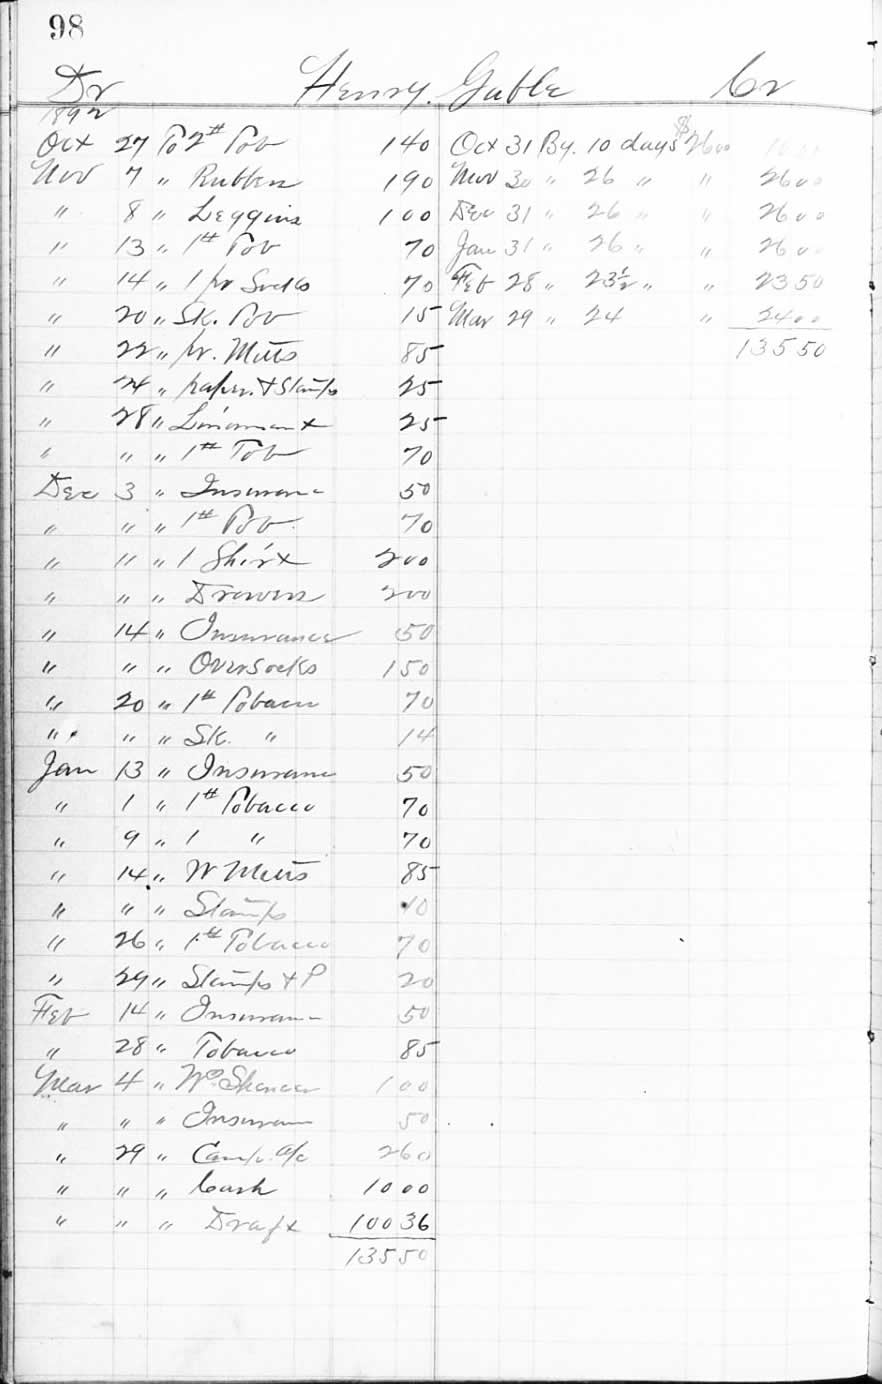 Ledger page for Henry Gable for items he purchased from the lumber camp store and his wages, 1892.